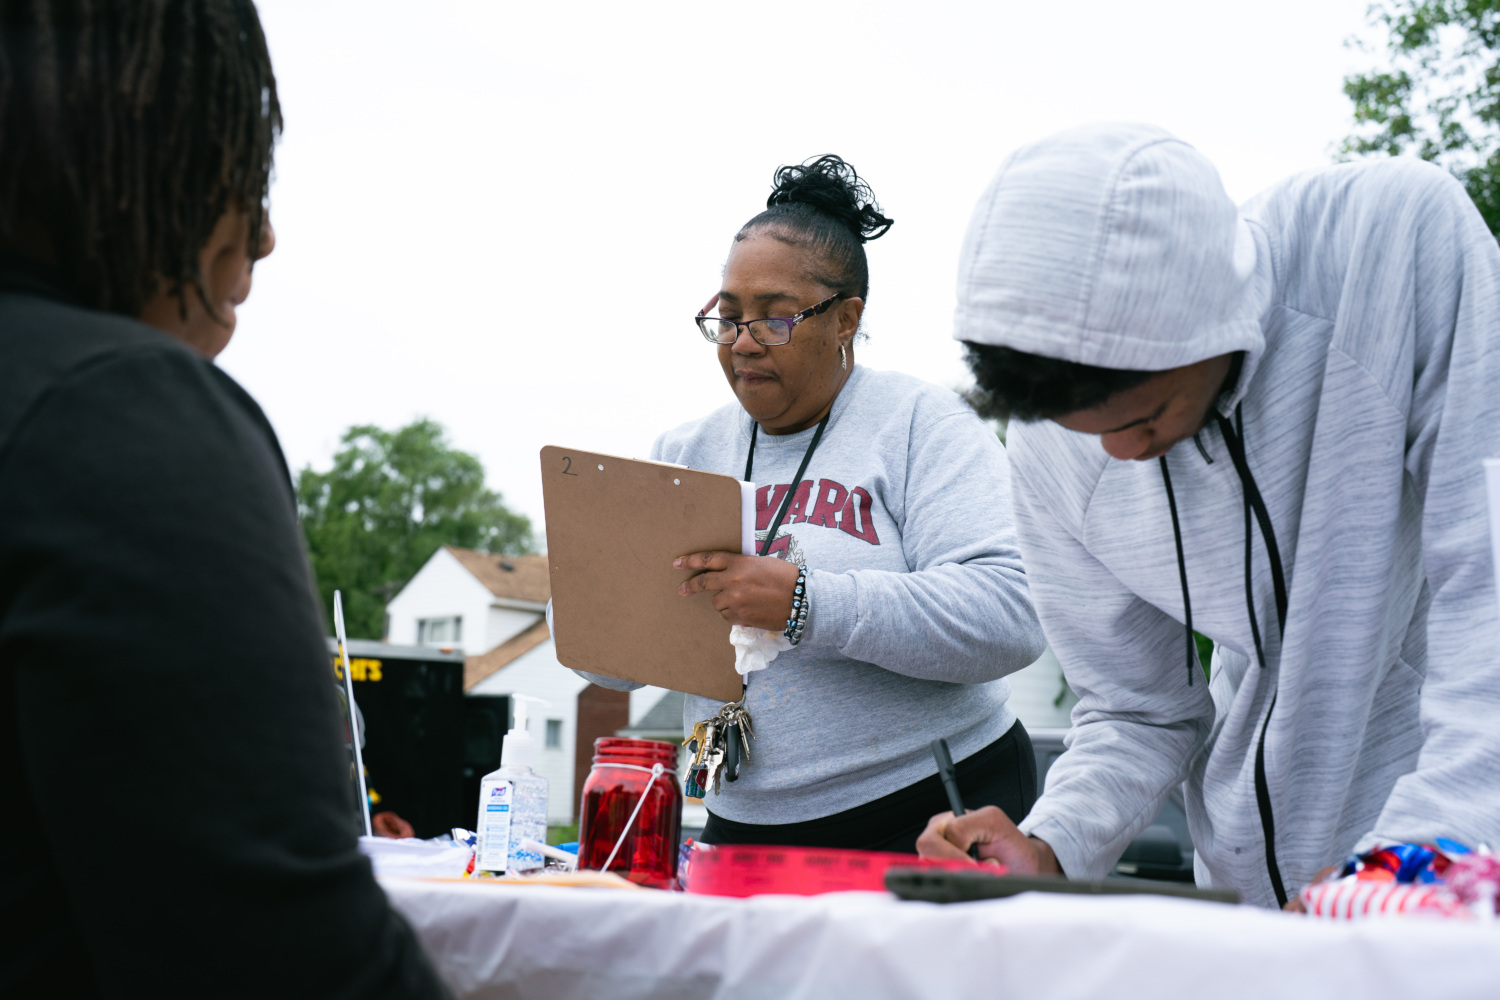 Two community members stand over a table and fill out forms on clipboards